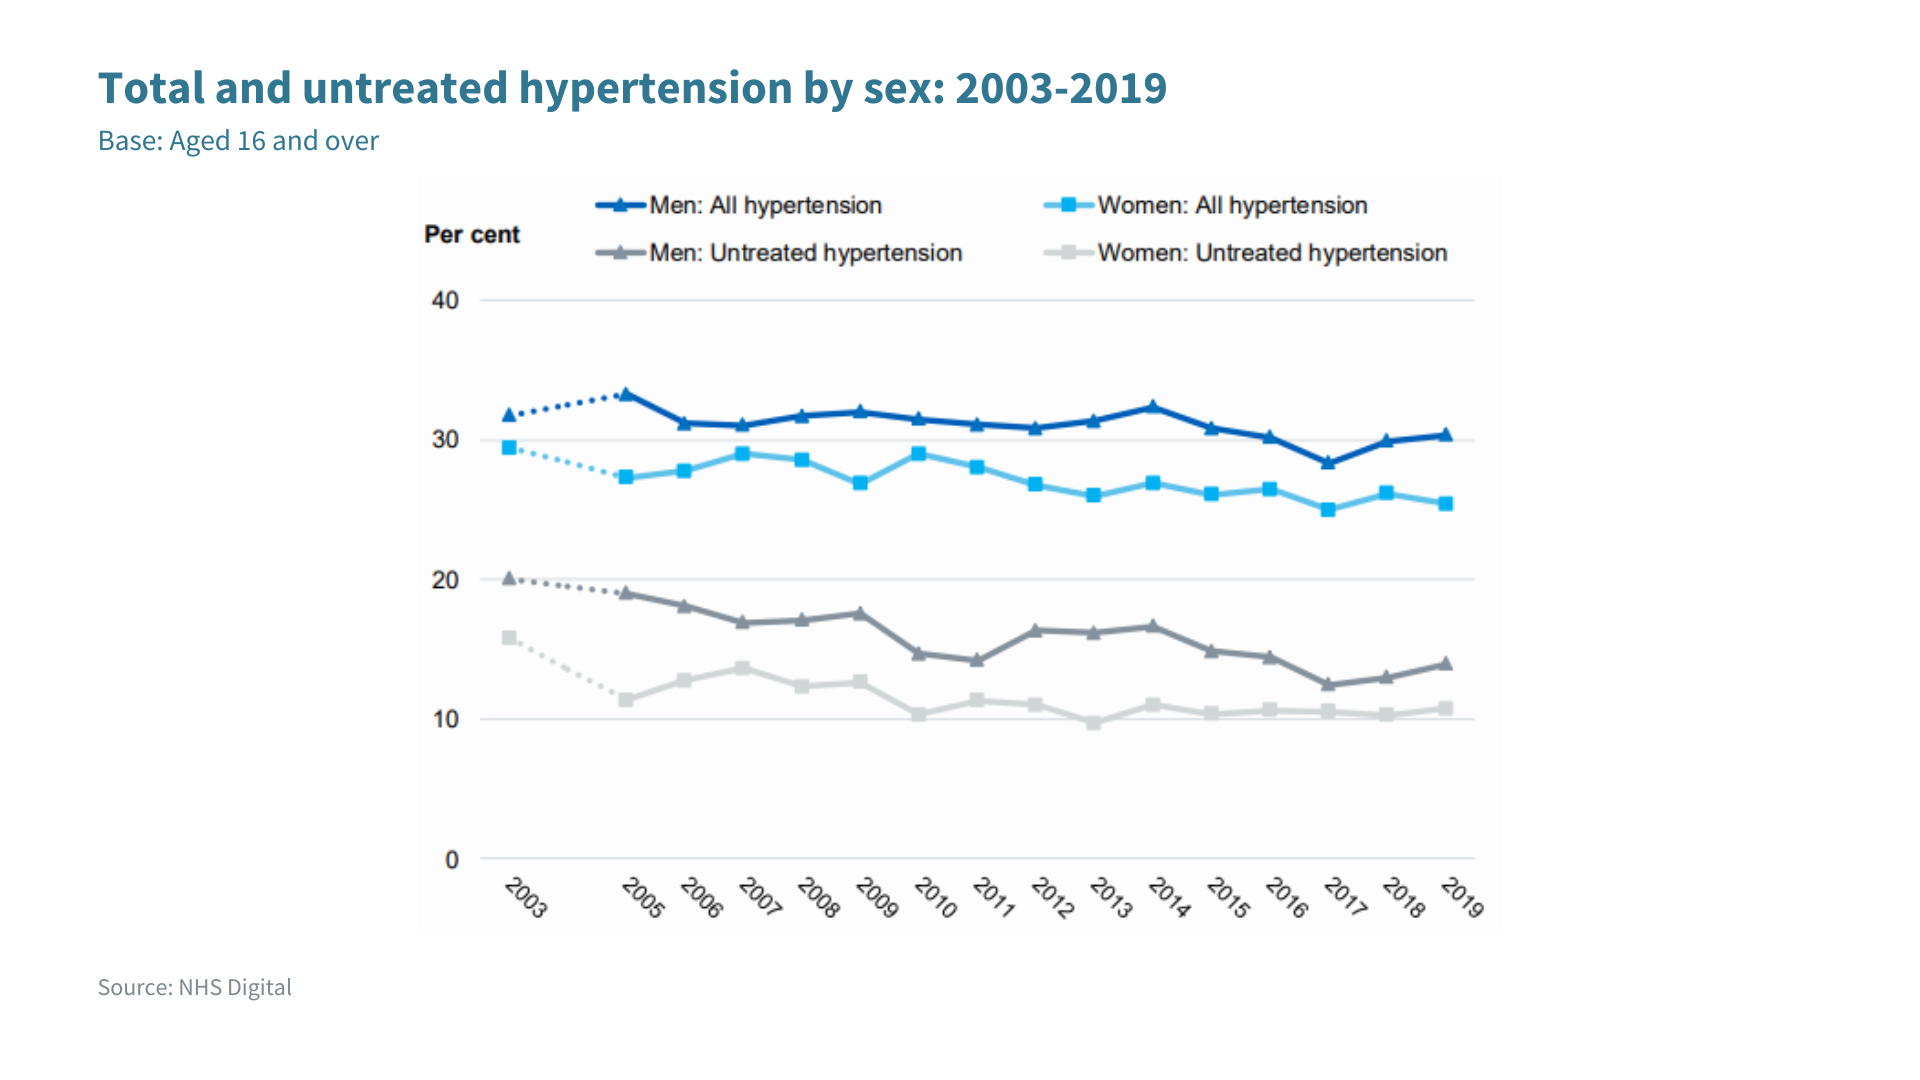 A table showing total and untreated hypertension by sex: 2003-2019